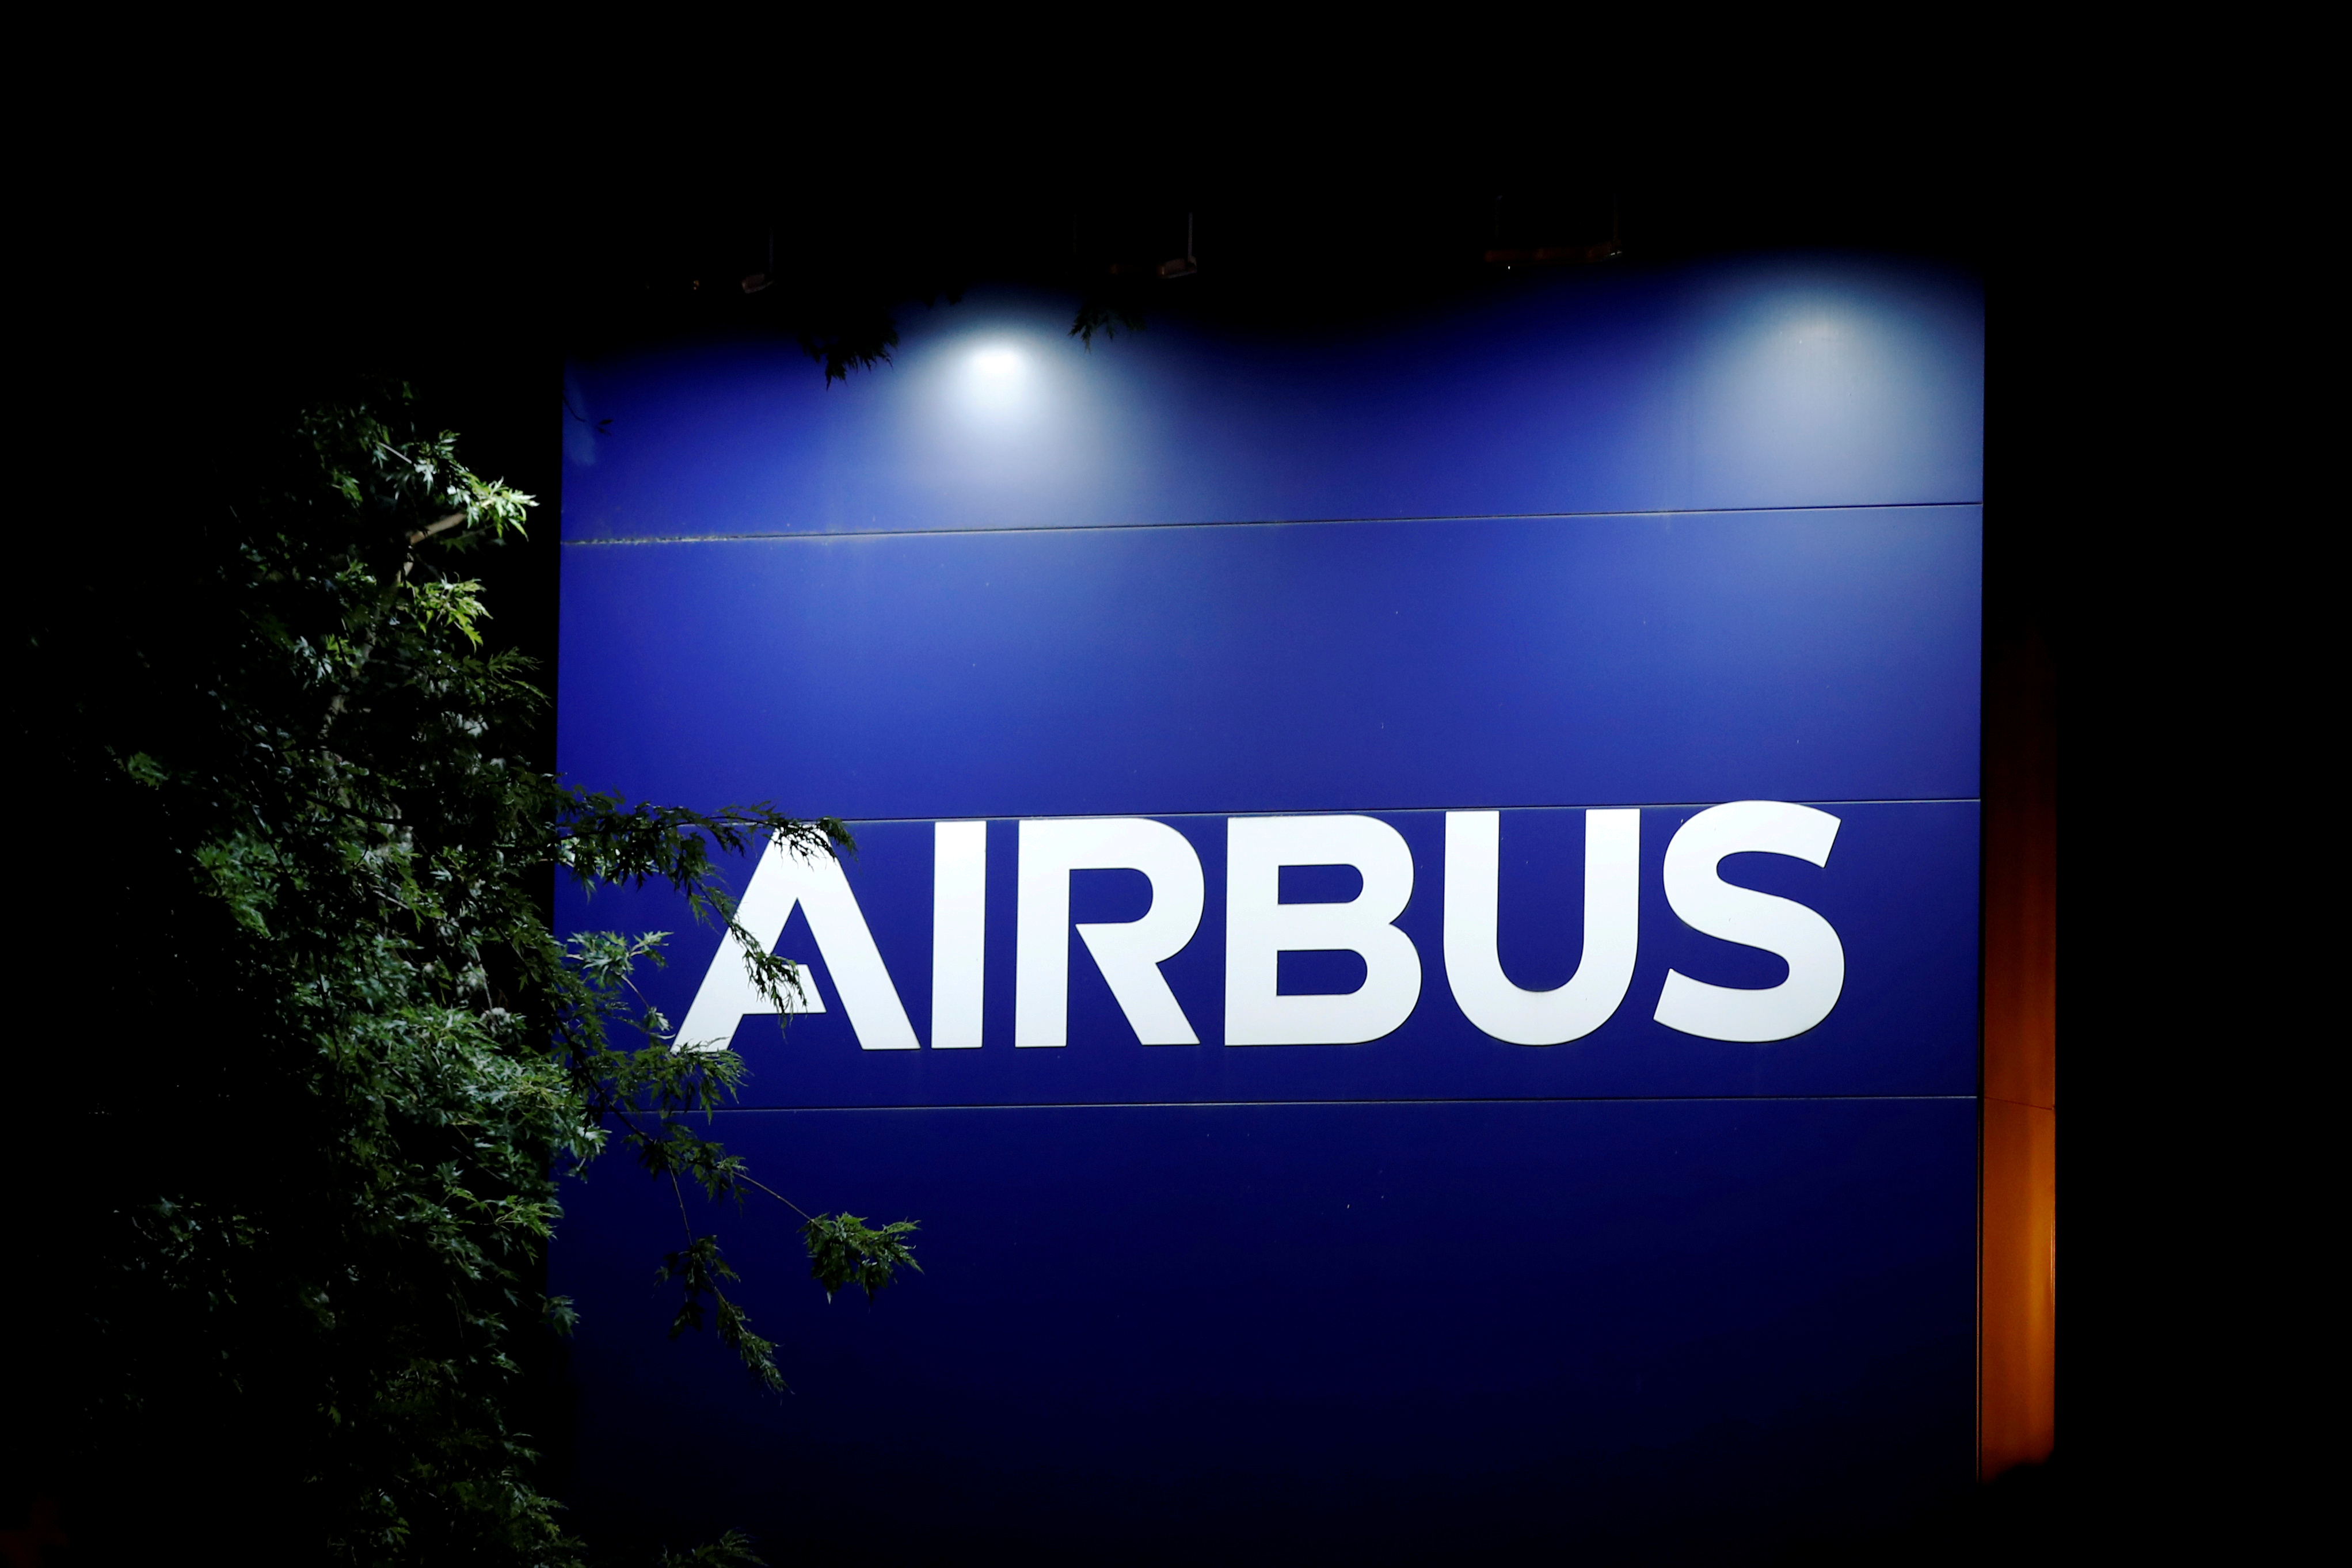 A logo of Airbus is seen at the entrance of its factory in Blagnac near Toulouse, France, July 2, 2020. REUTERS/Benoit Tessier/File Photo